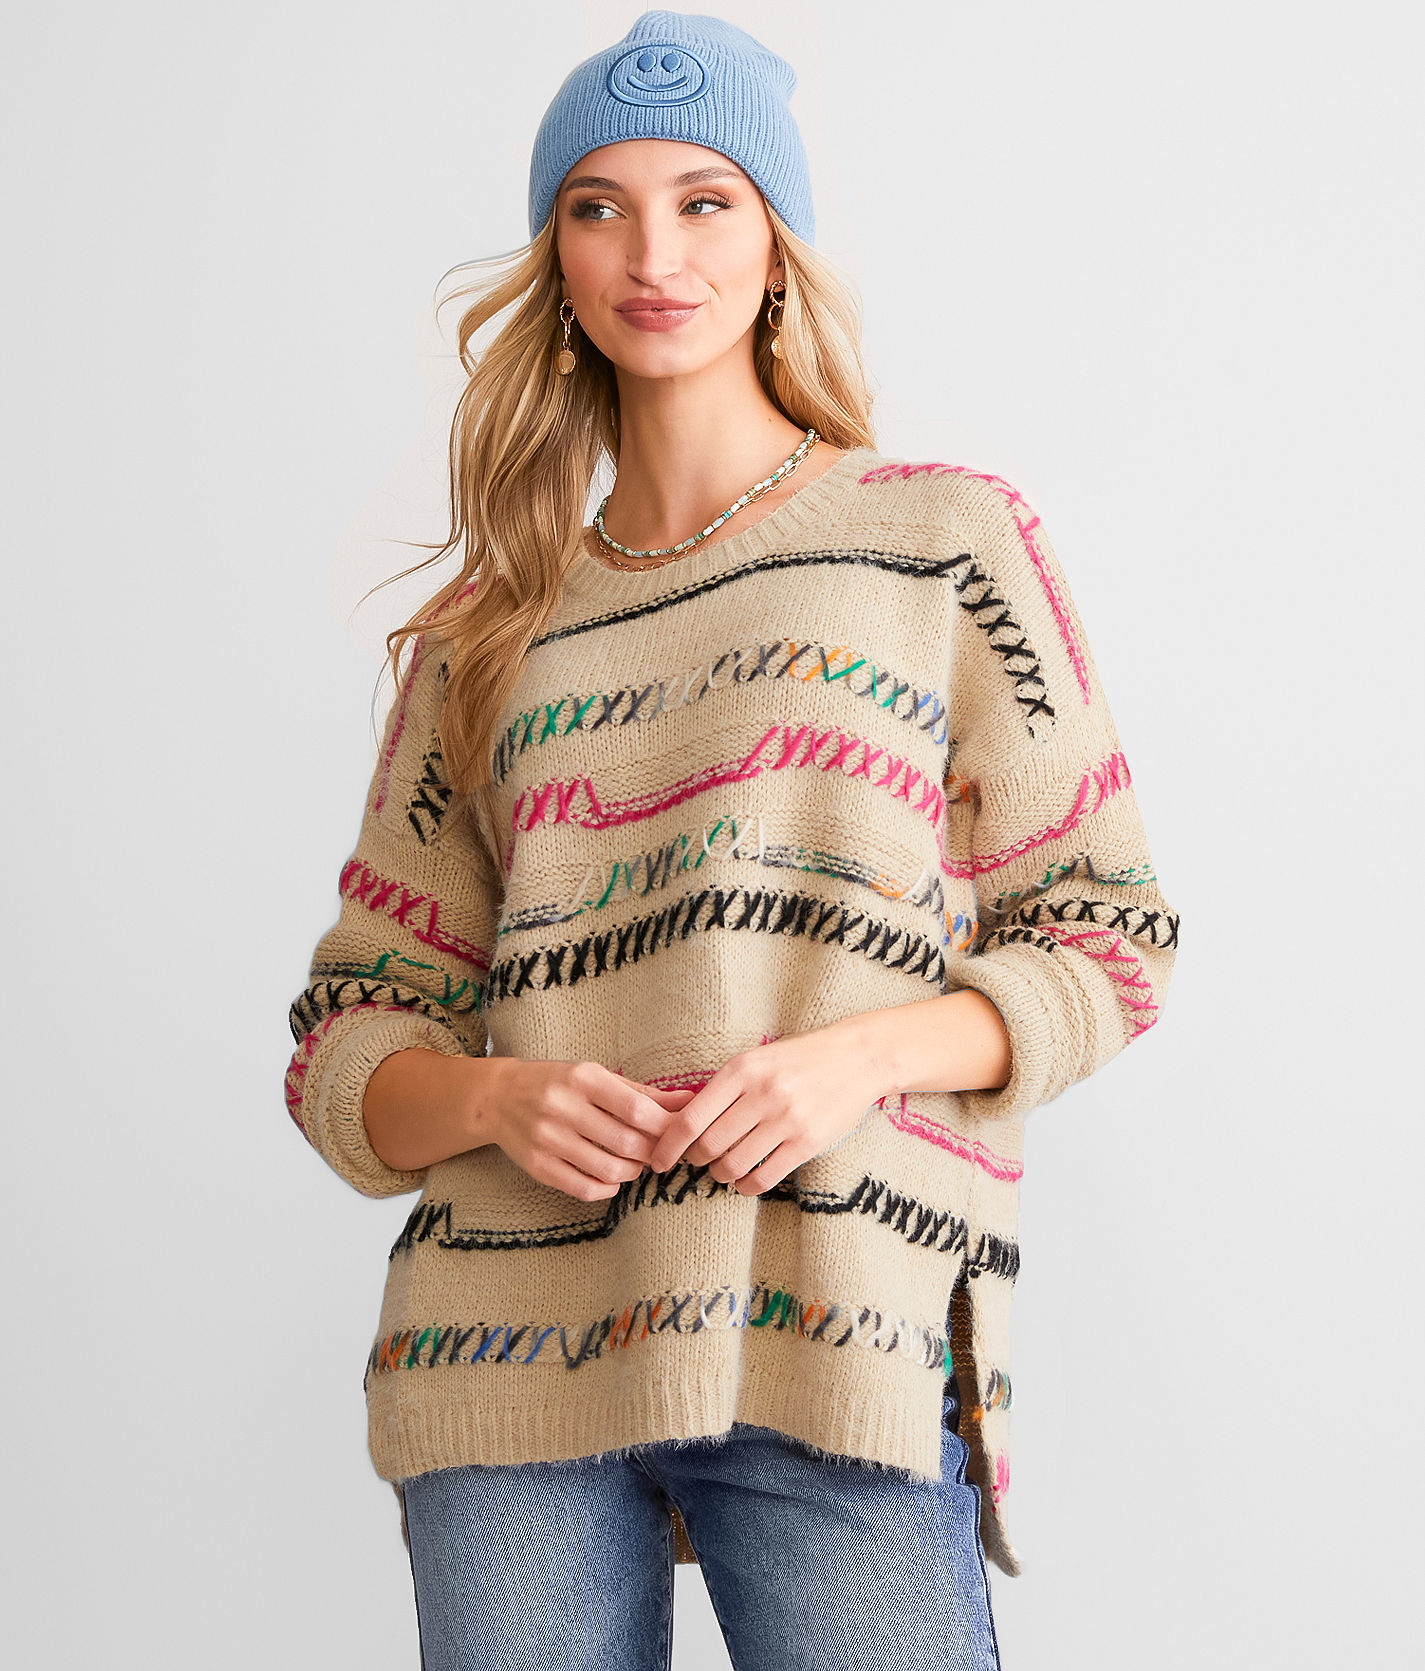 Willow & Root Multi Stitch Oversized Sweater - Women's Sweaters in